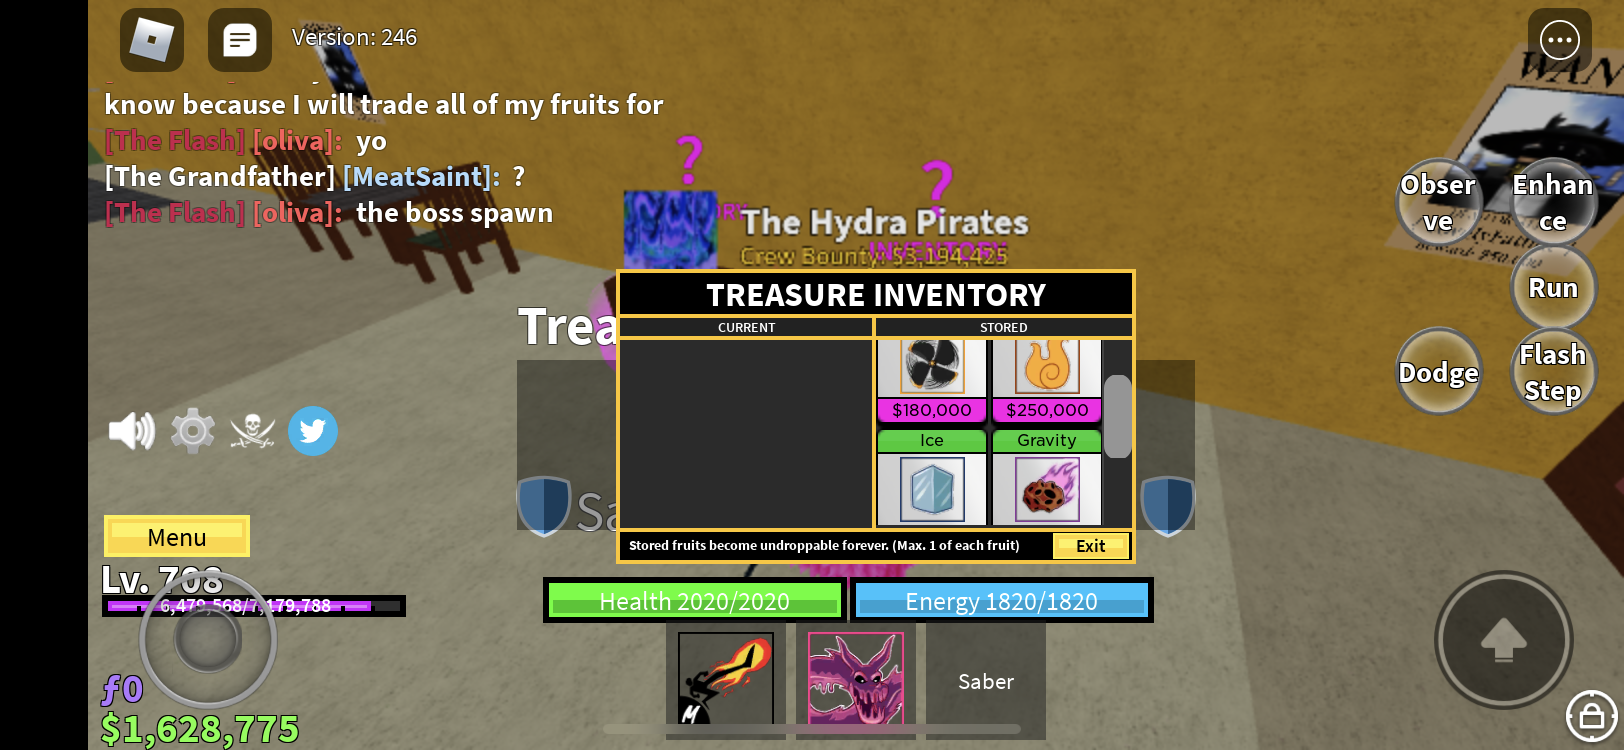 Gravity - Best Trade for this Fruit in Blox Fruits 